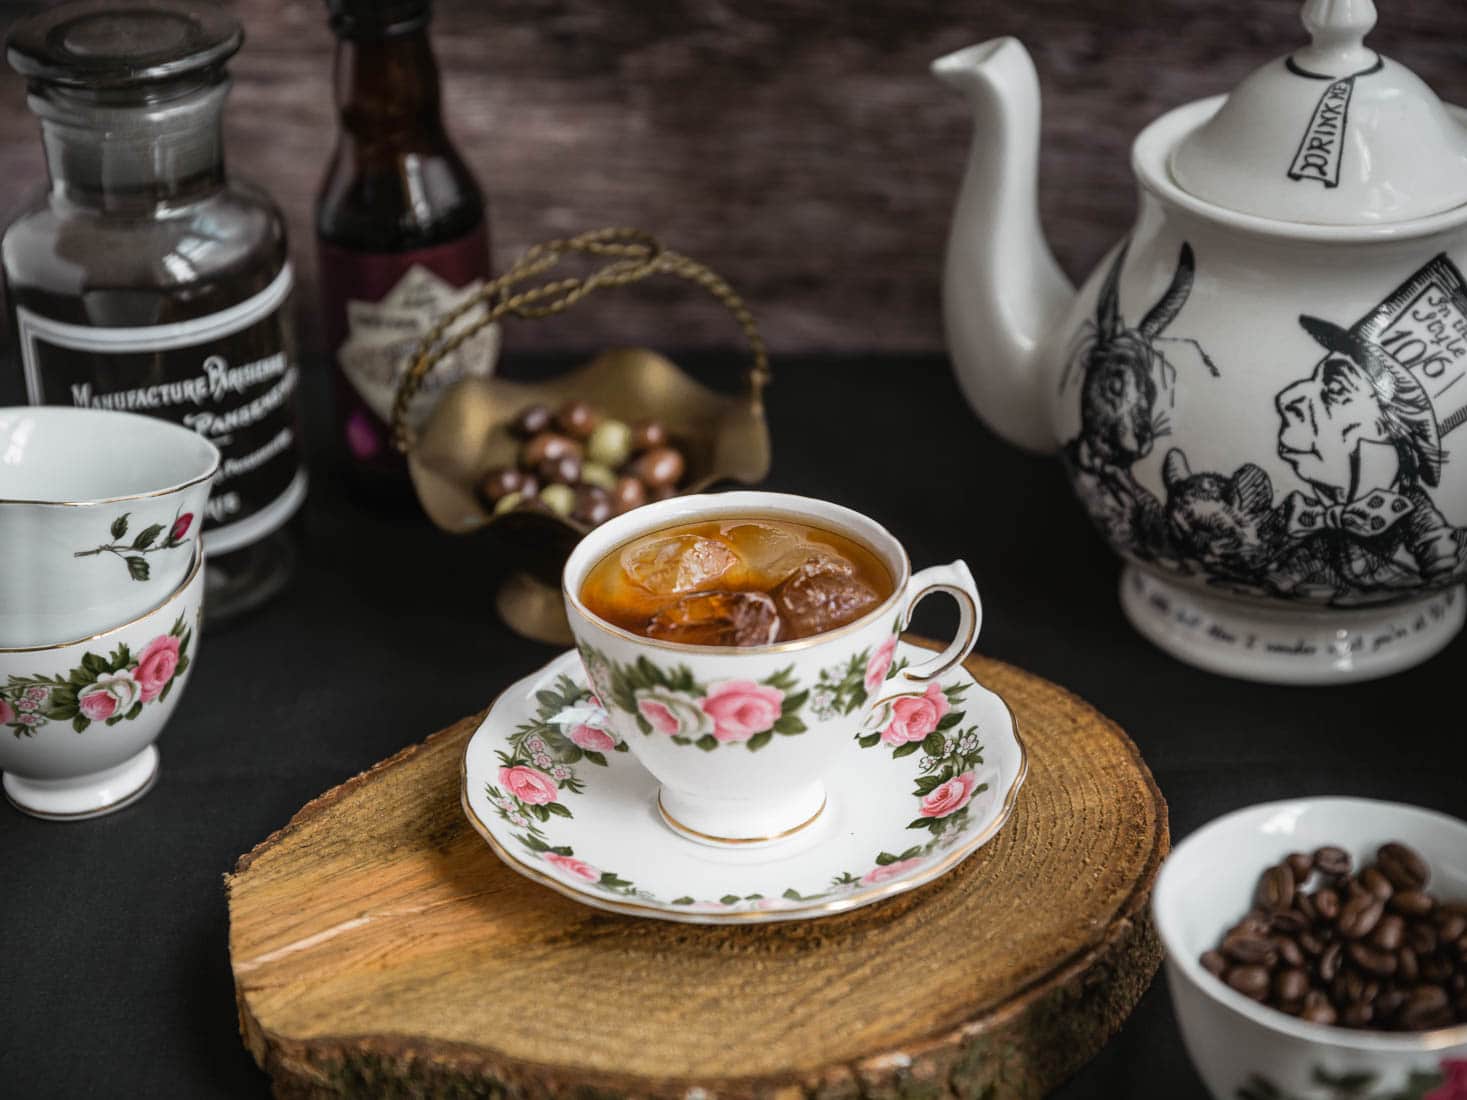 A china tea cup with floral pattern, containing a dark cocktail, sitting on a wooden board, in front of a teapot and bowl of olives - from the Clockwork Rose bar Bristol